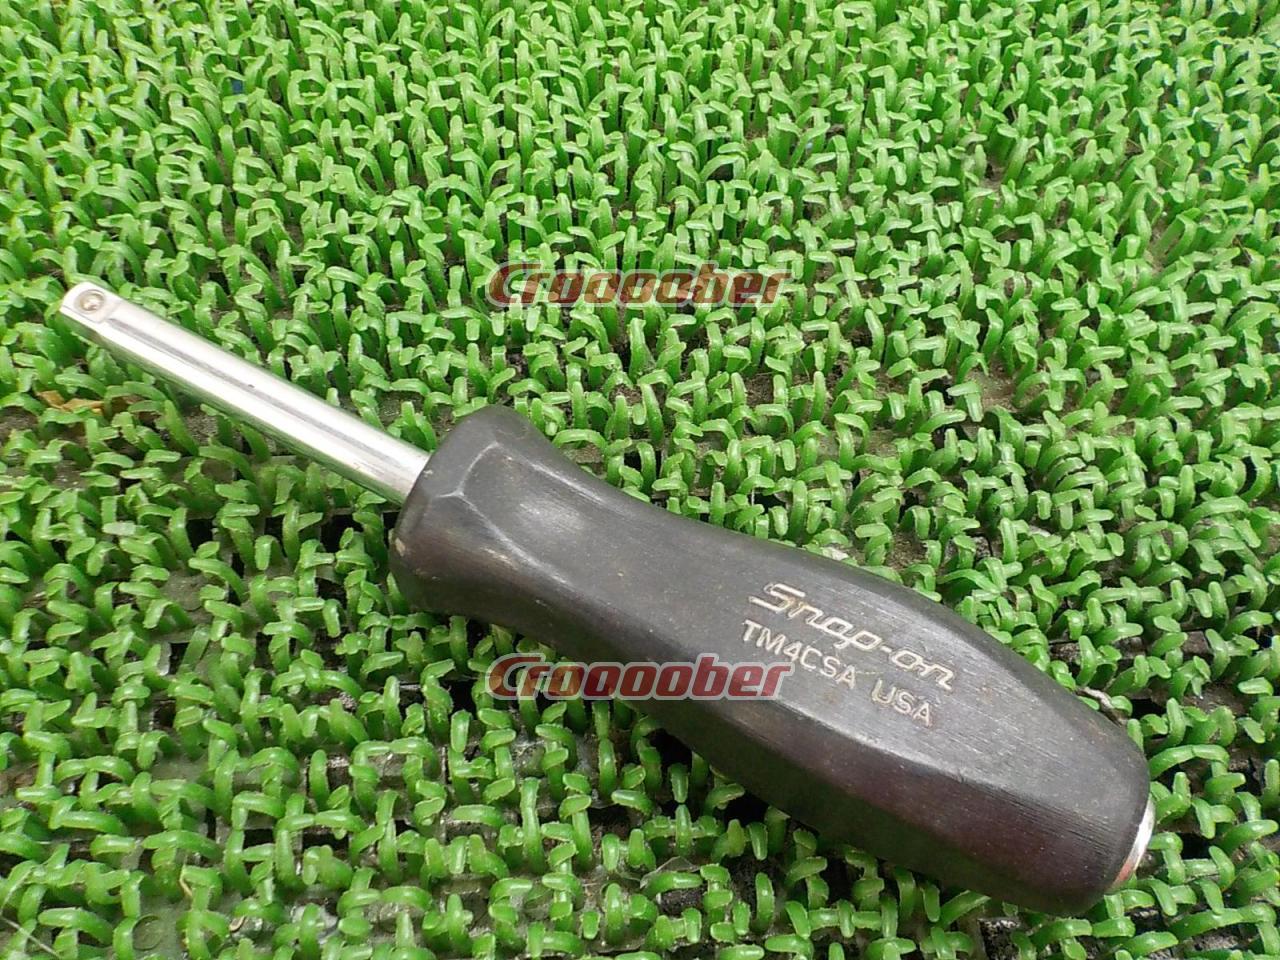 New Snap On 1/4 Driver Green Hard Handle with 1/4 Female Square Drive TM4CSA USA 